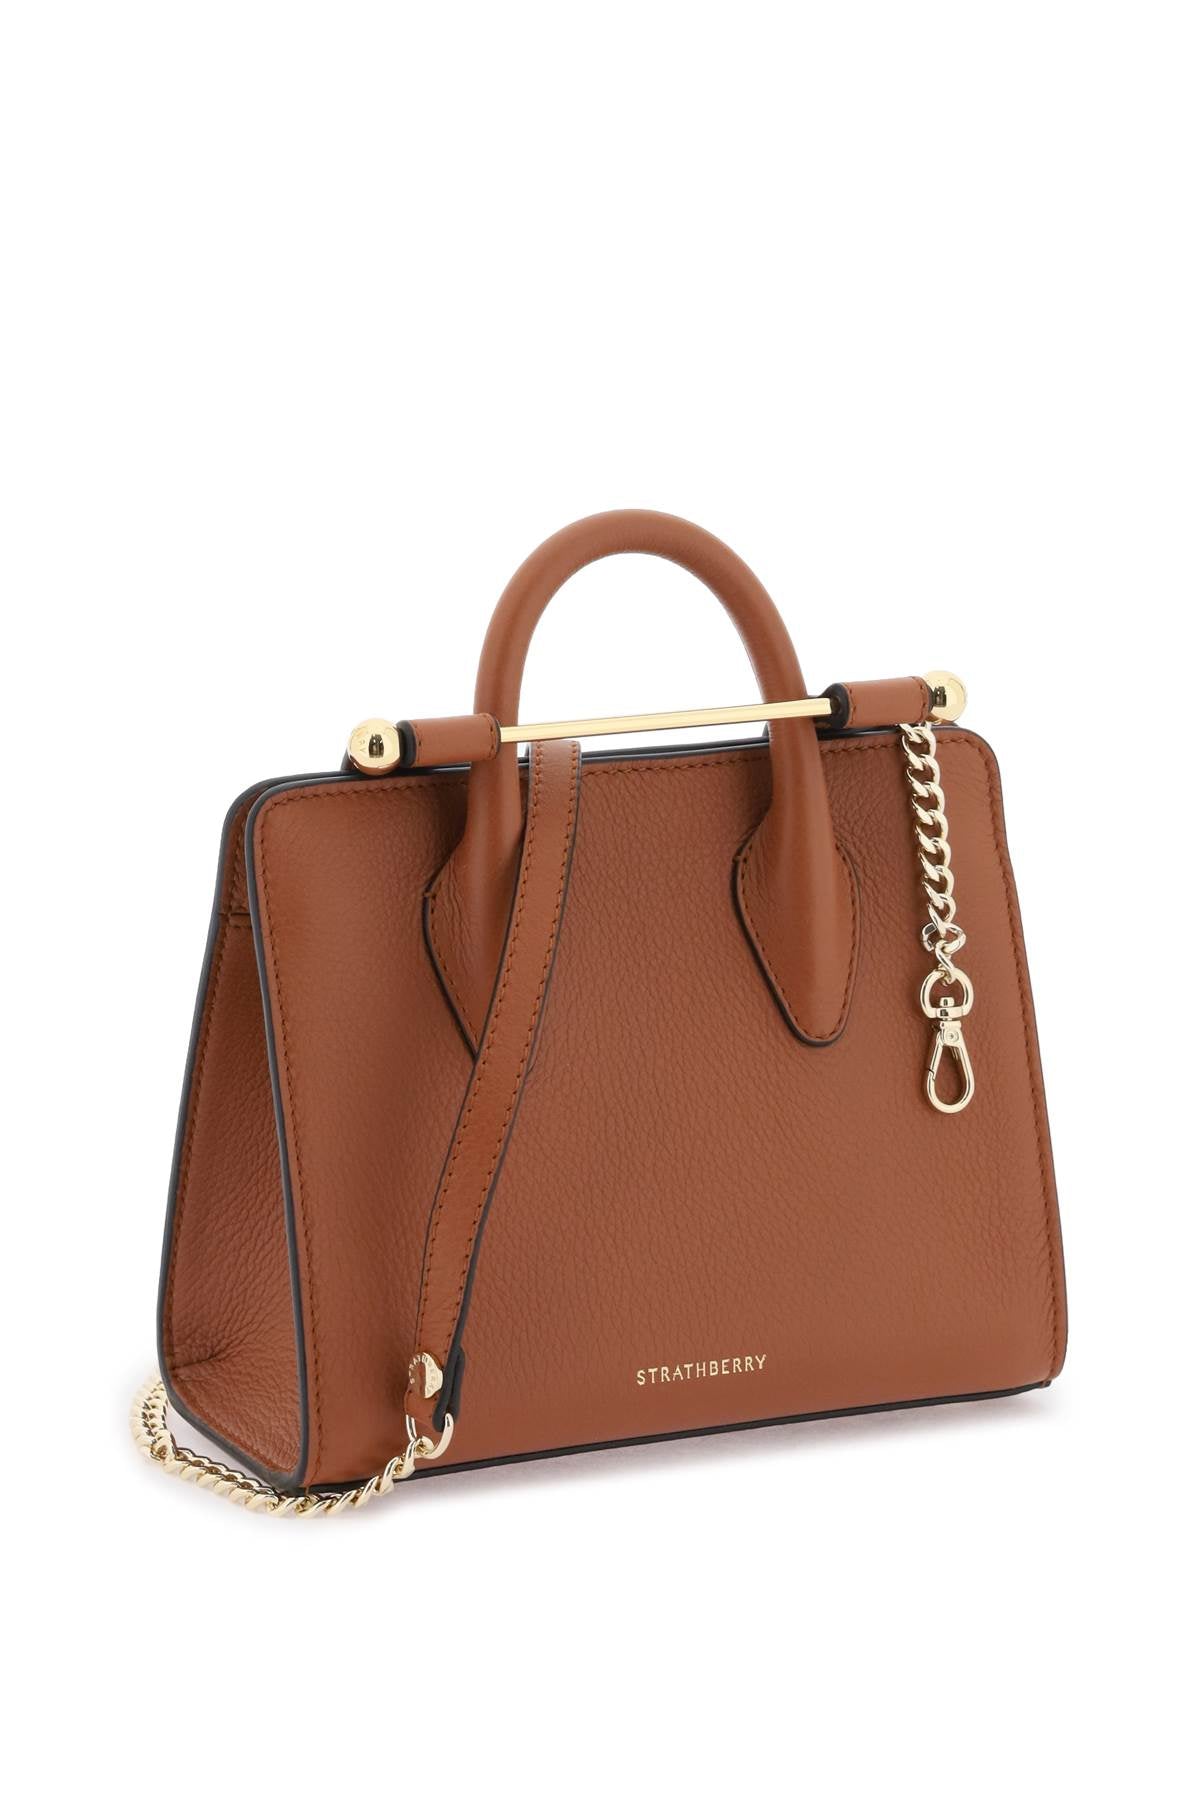 BROWN STRATHBERRY 'NANO TOTE' LEATHER BAG (20204100175)